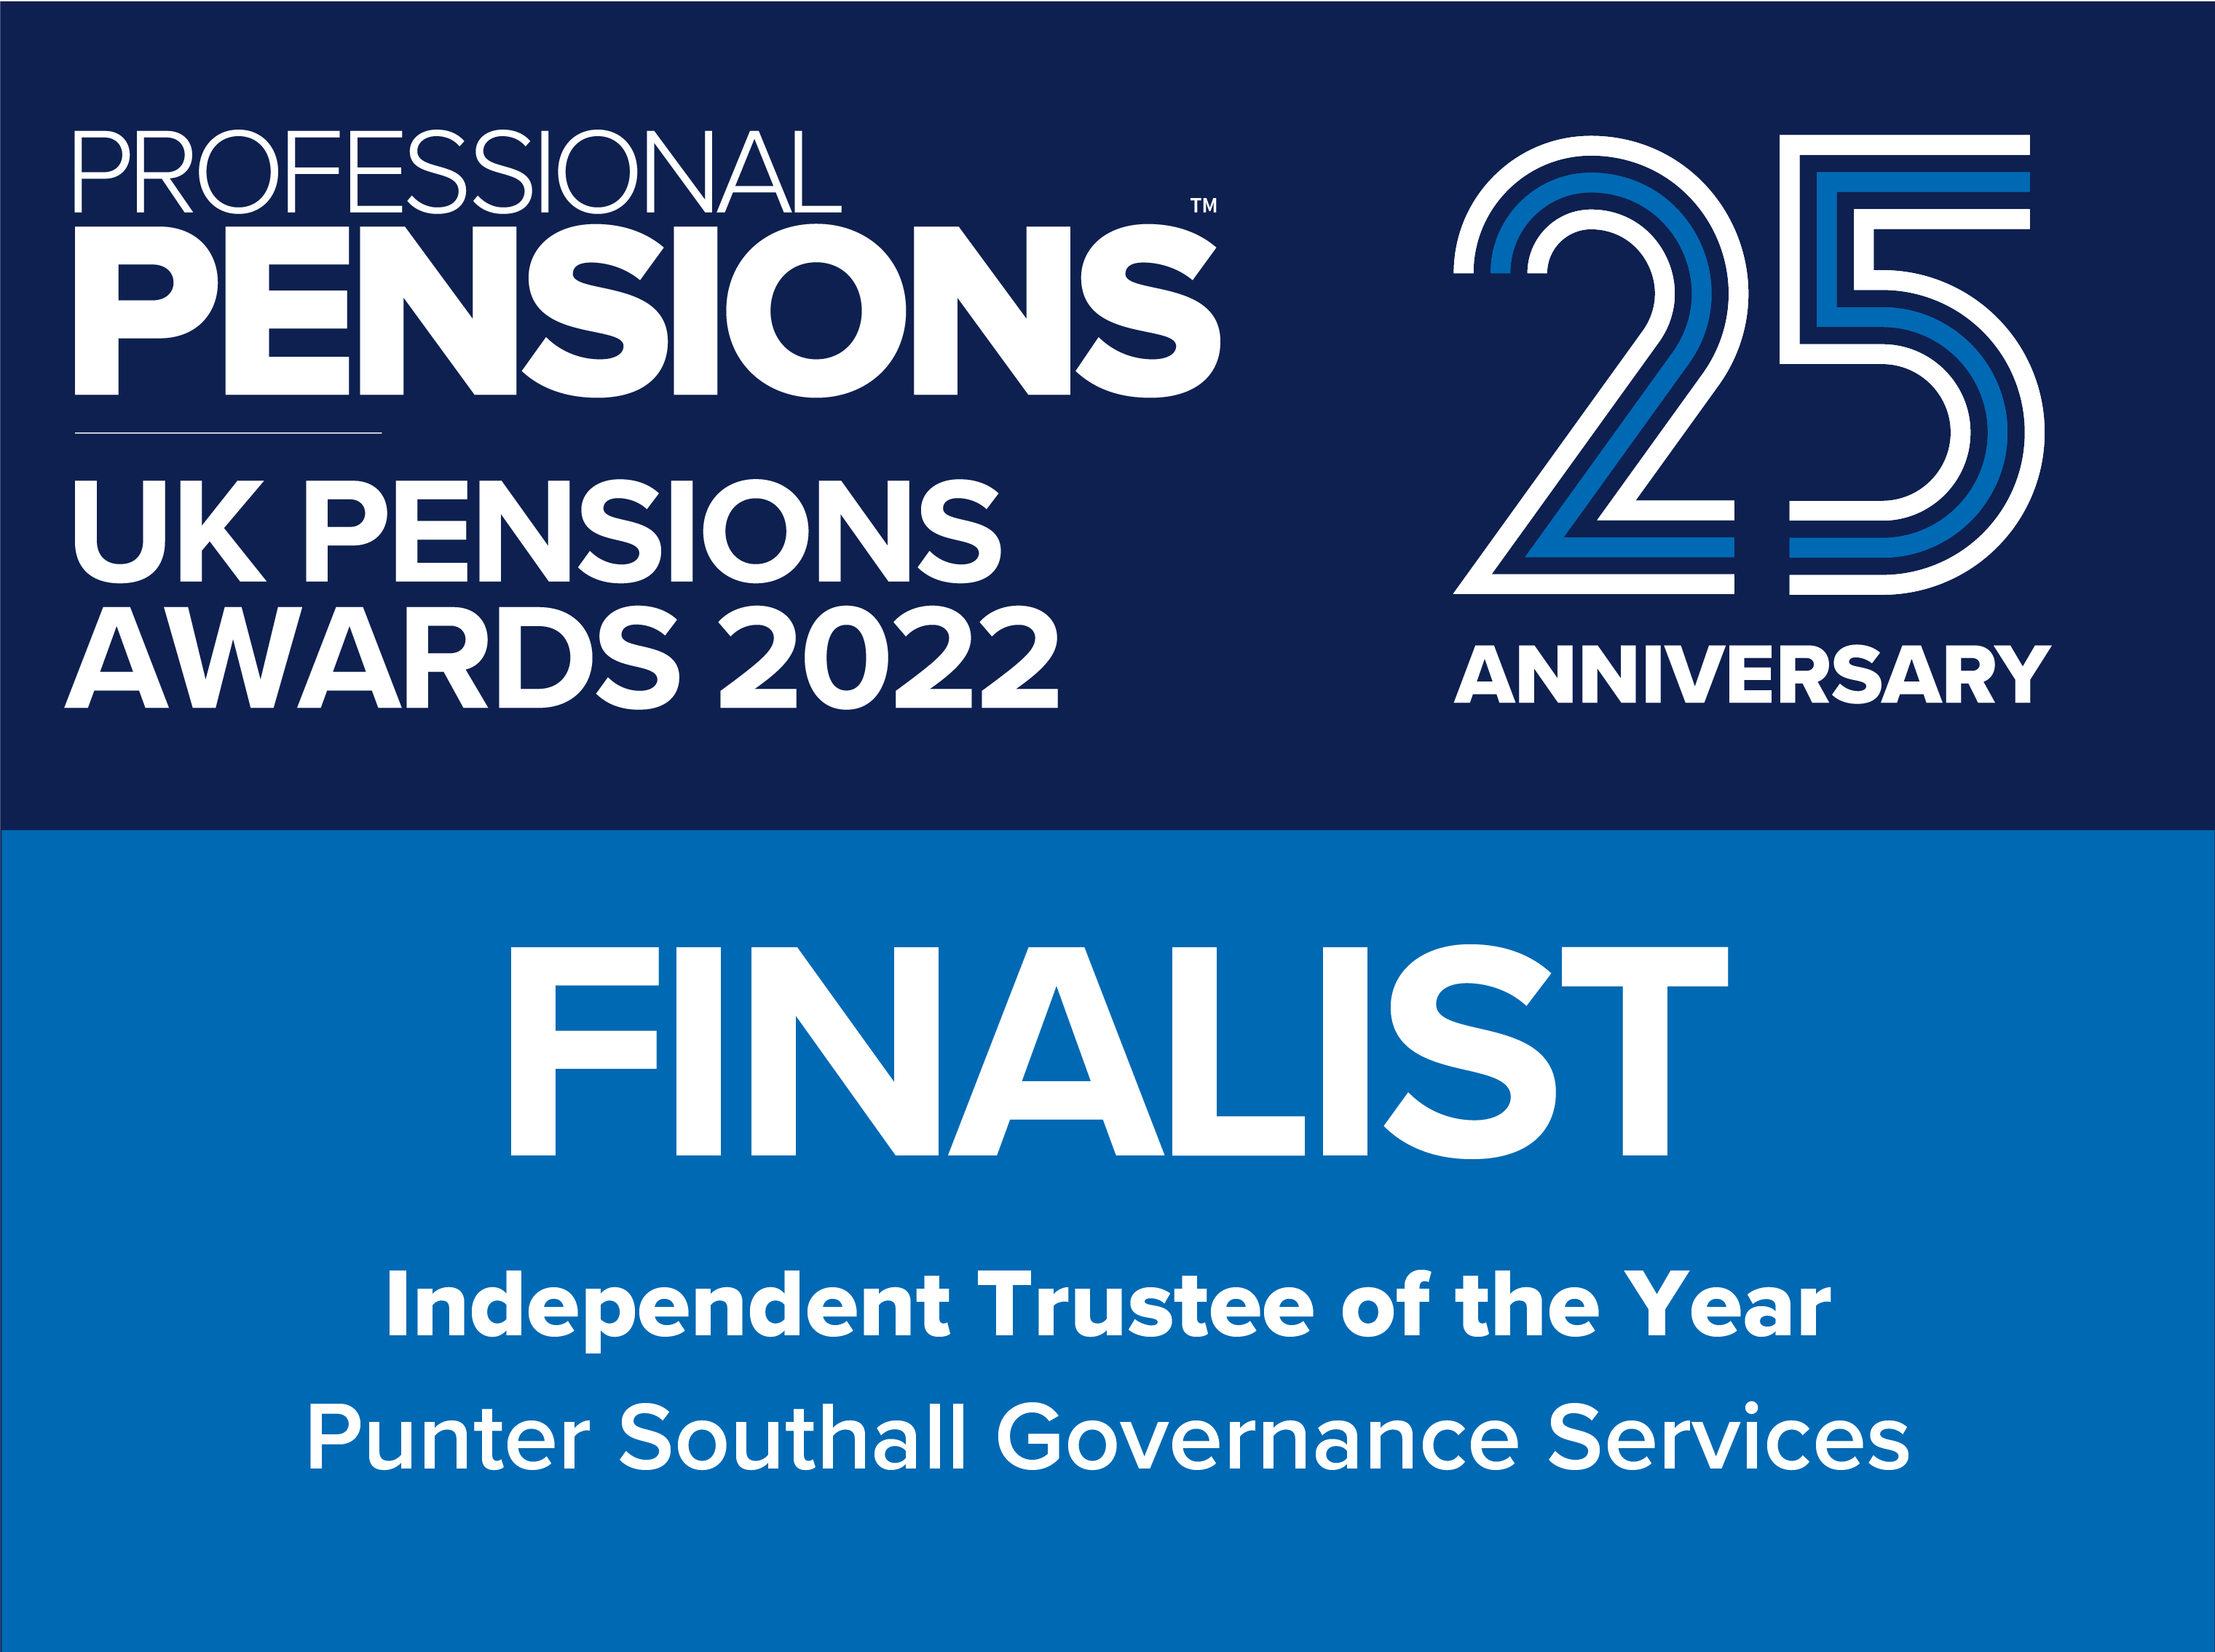 Professional Pensions FINALIST banner.